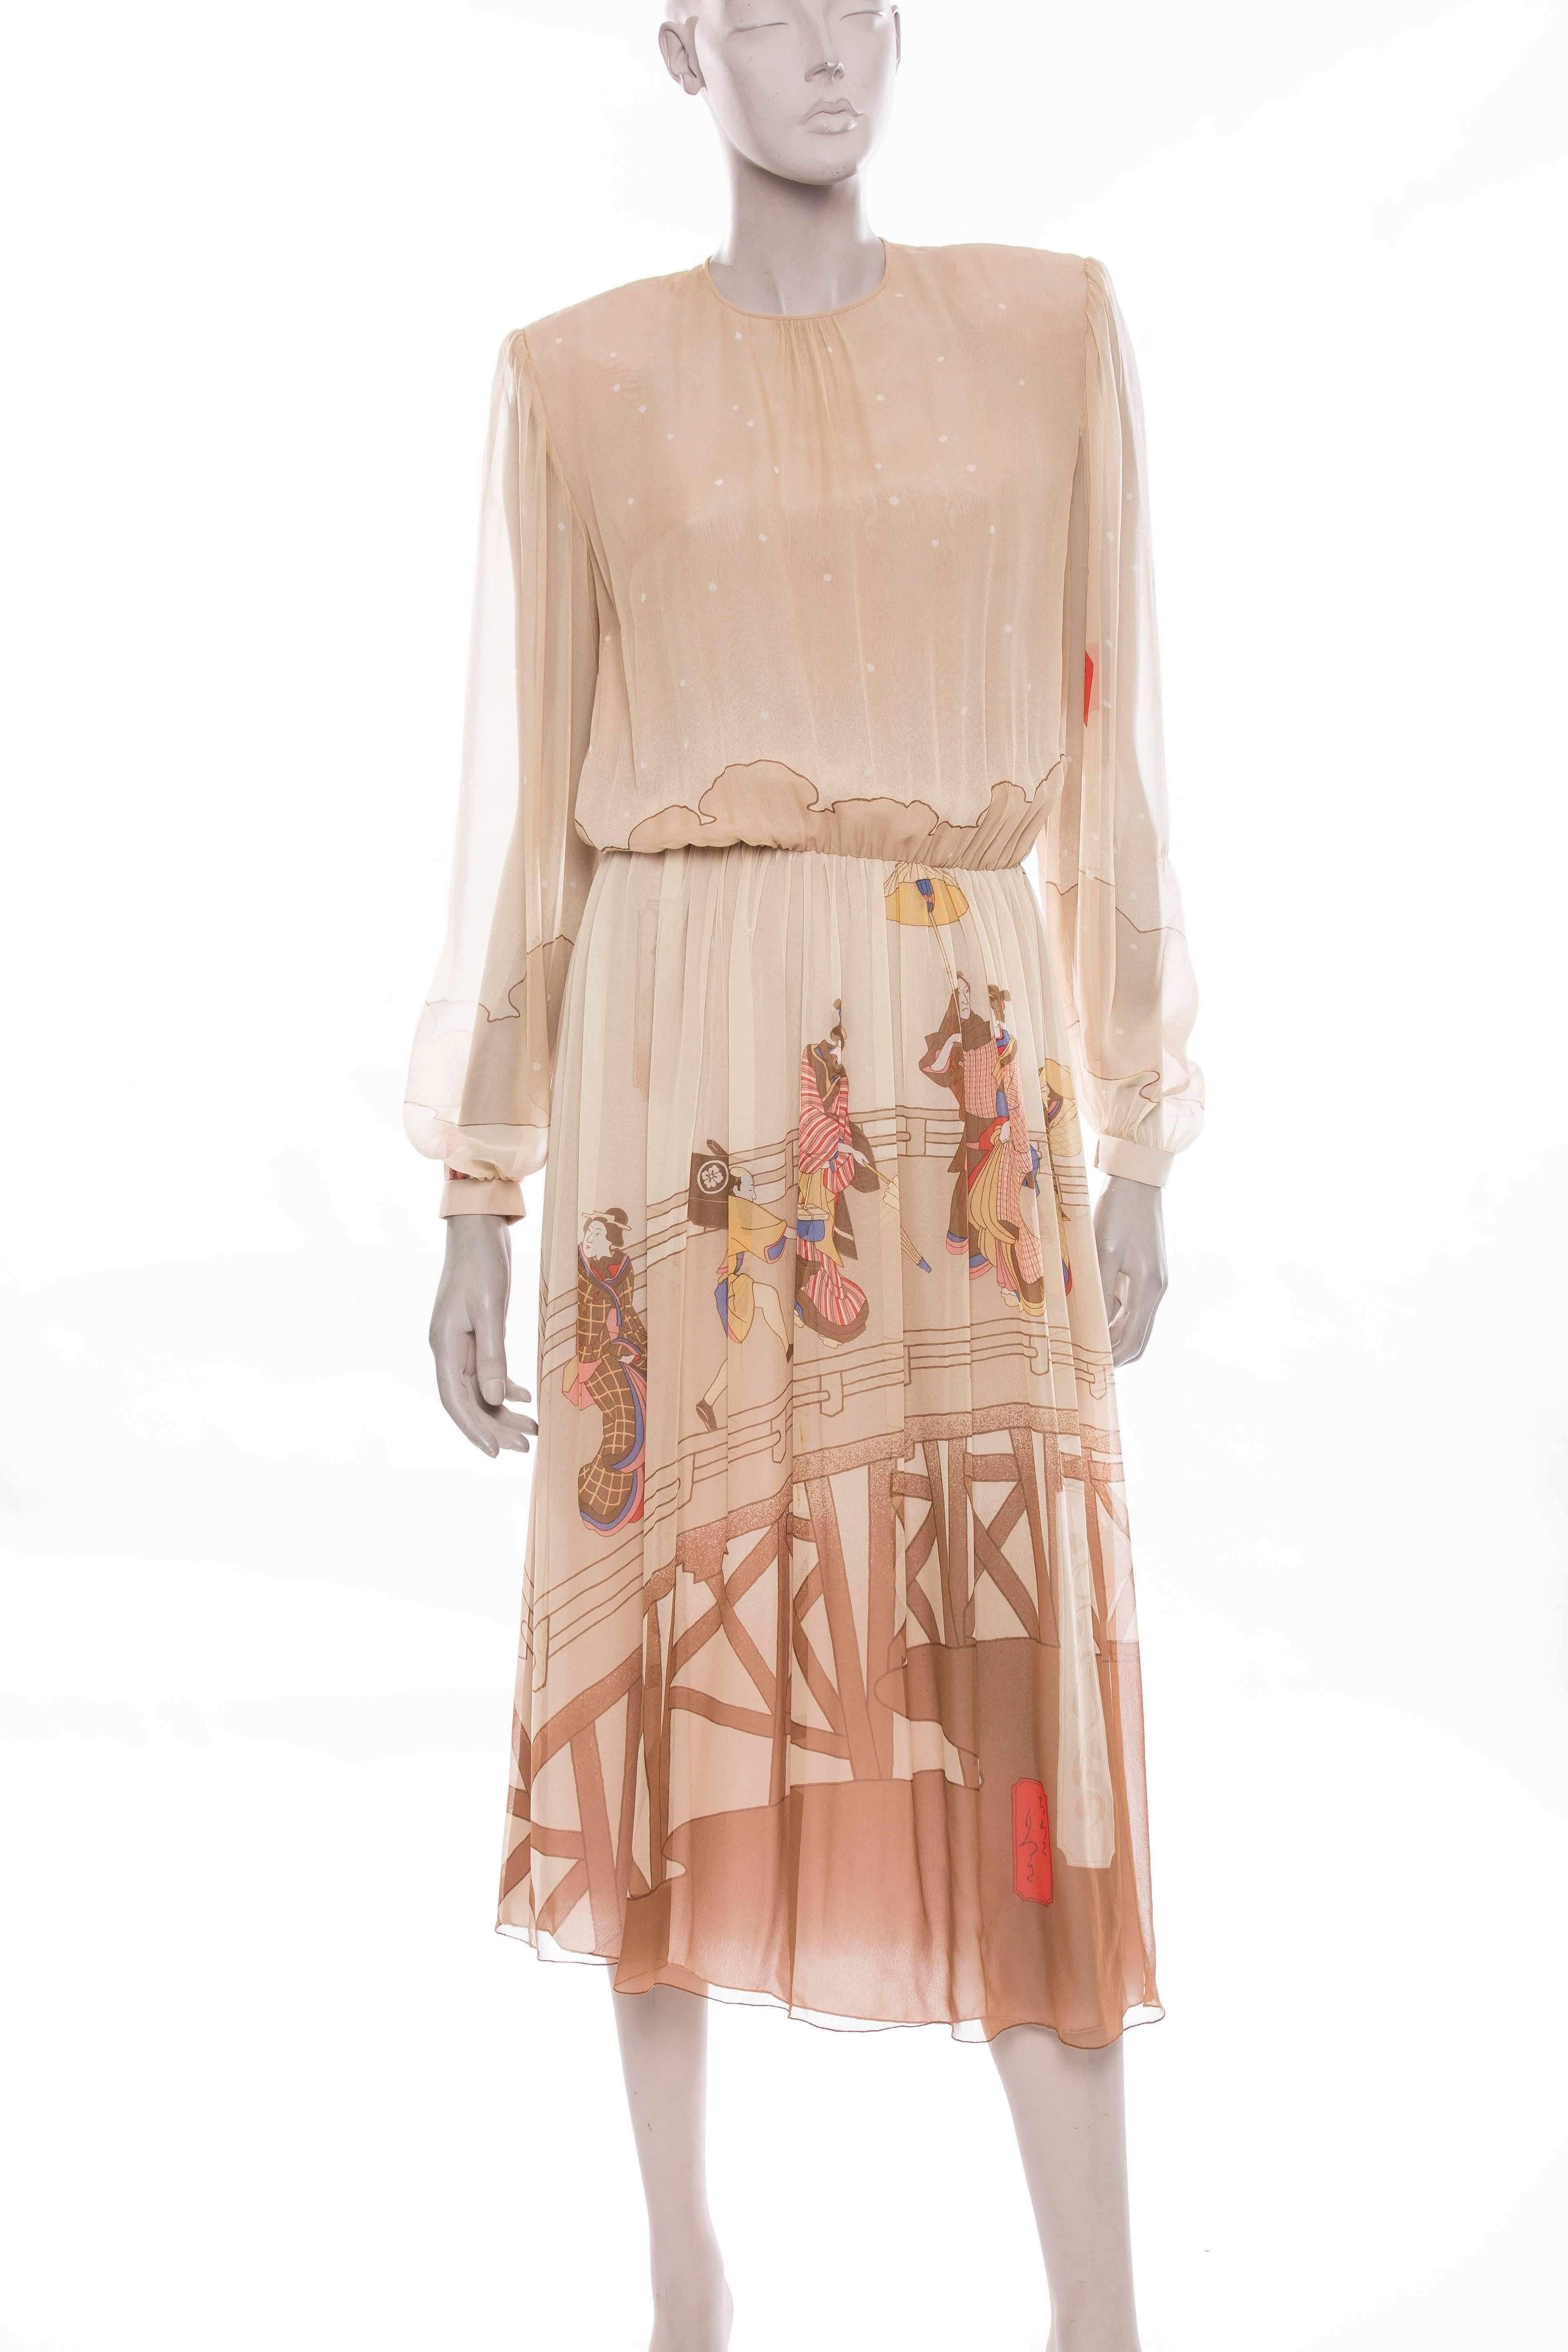 Hanae Mori silk chiffon long sleeve 1970's dress with printed Geisha's front and back,fully lined with back snaps.